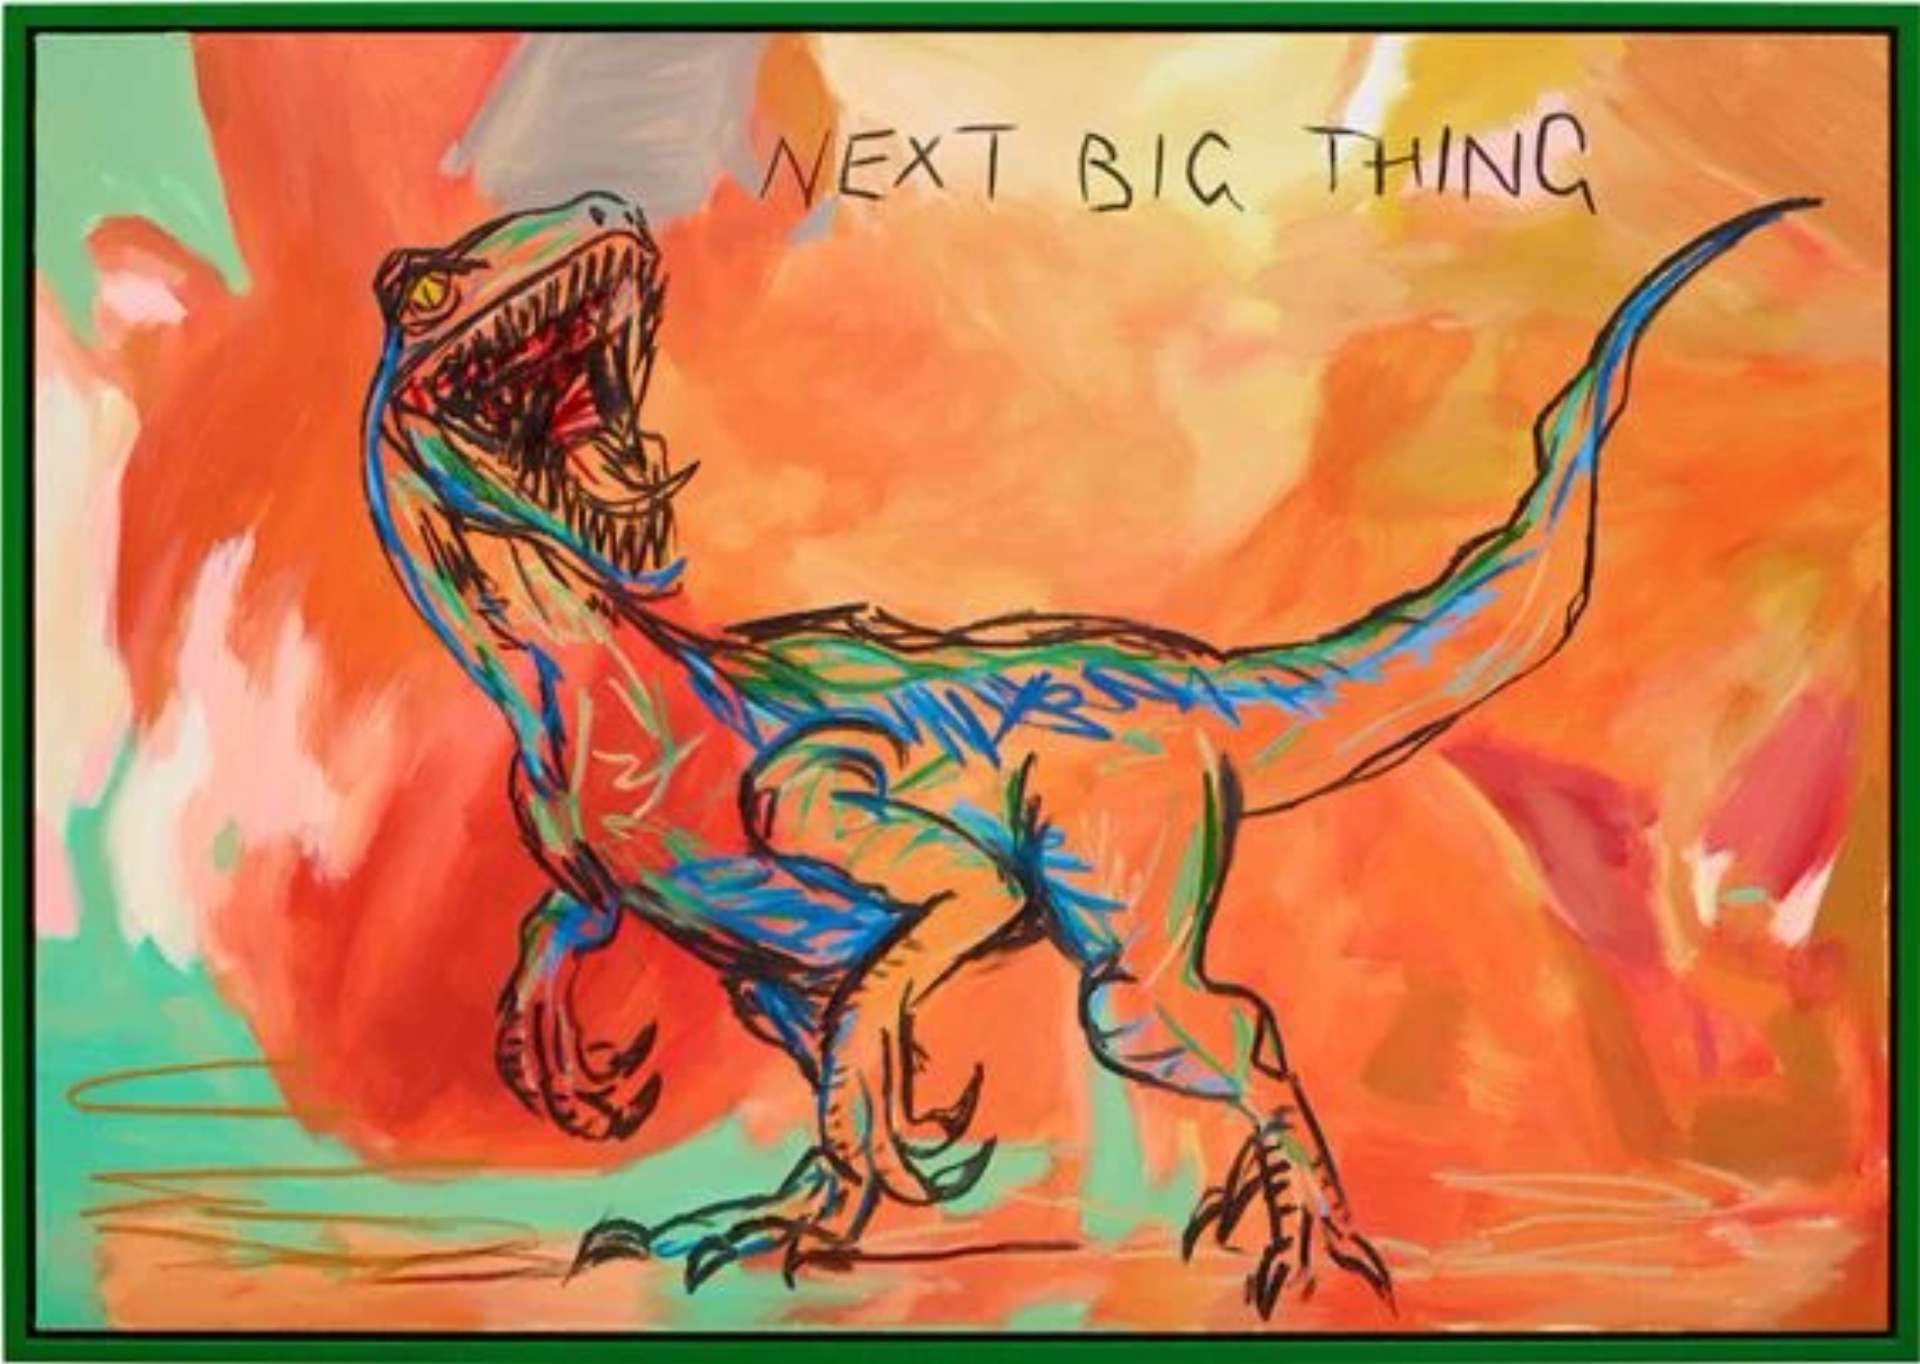 Next Big Thing by The Connor Brothers